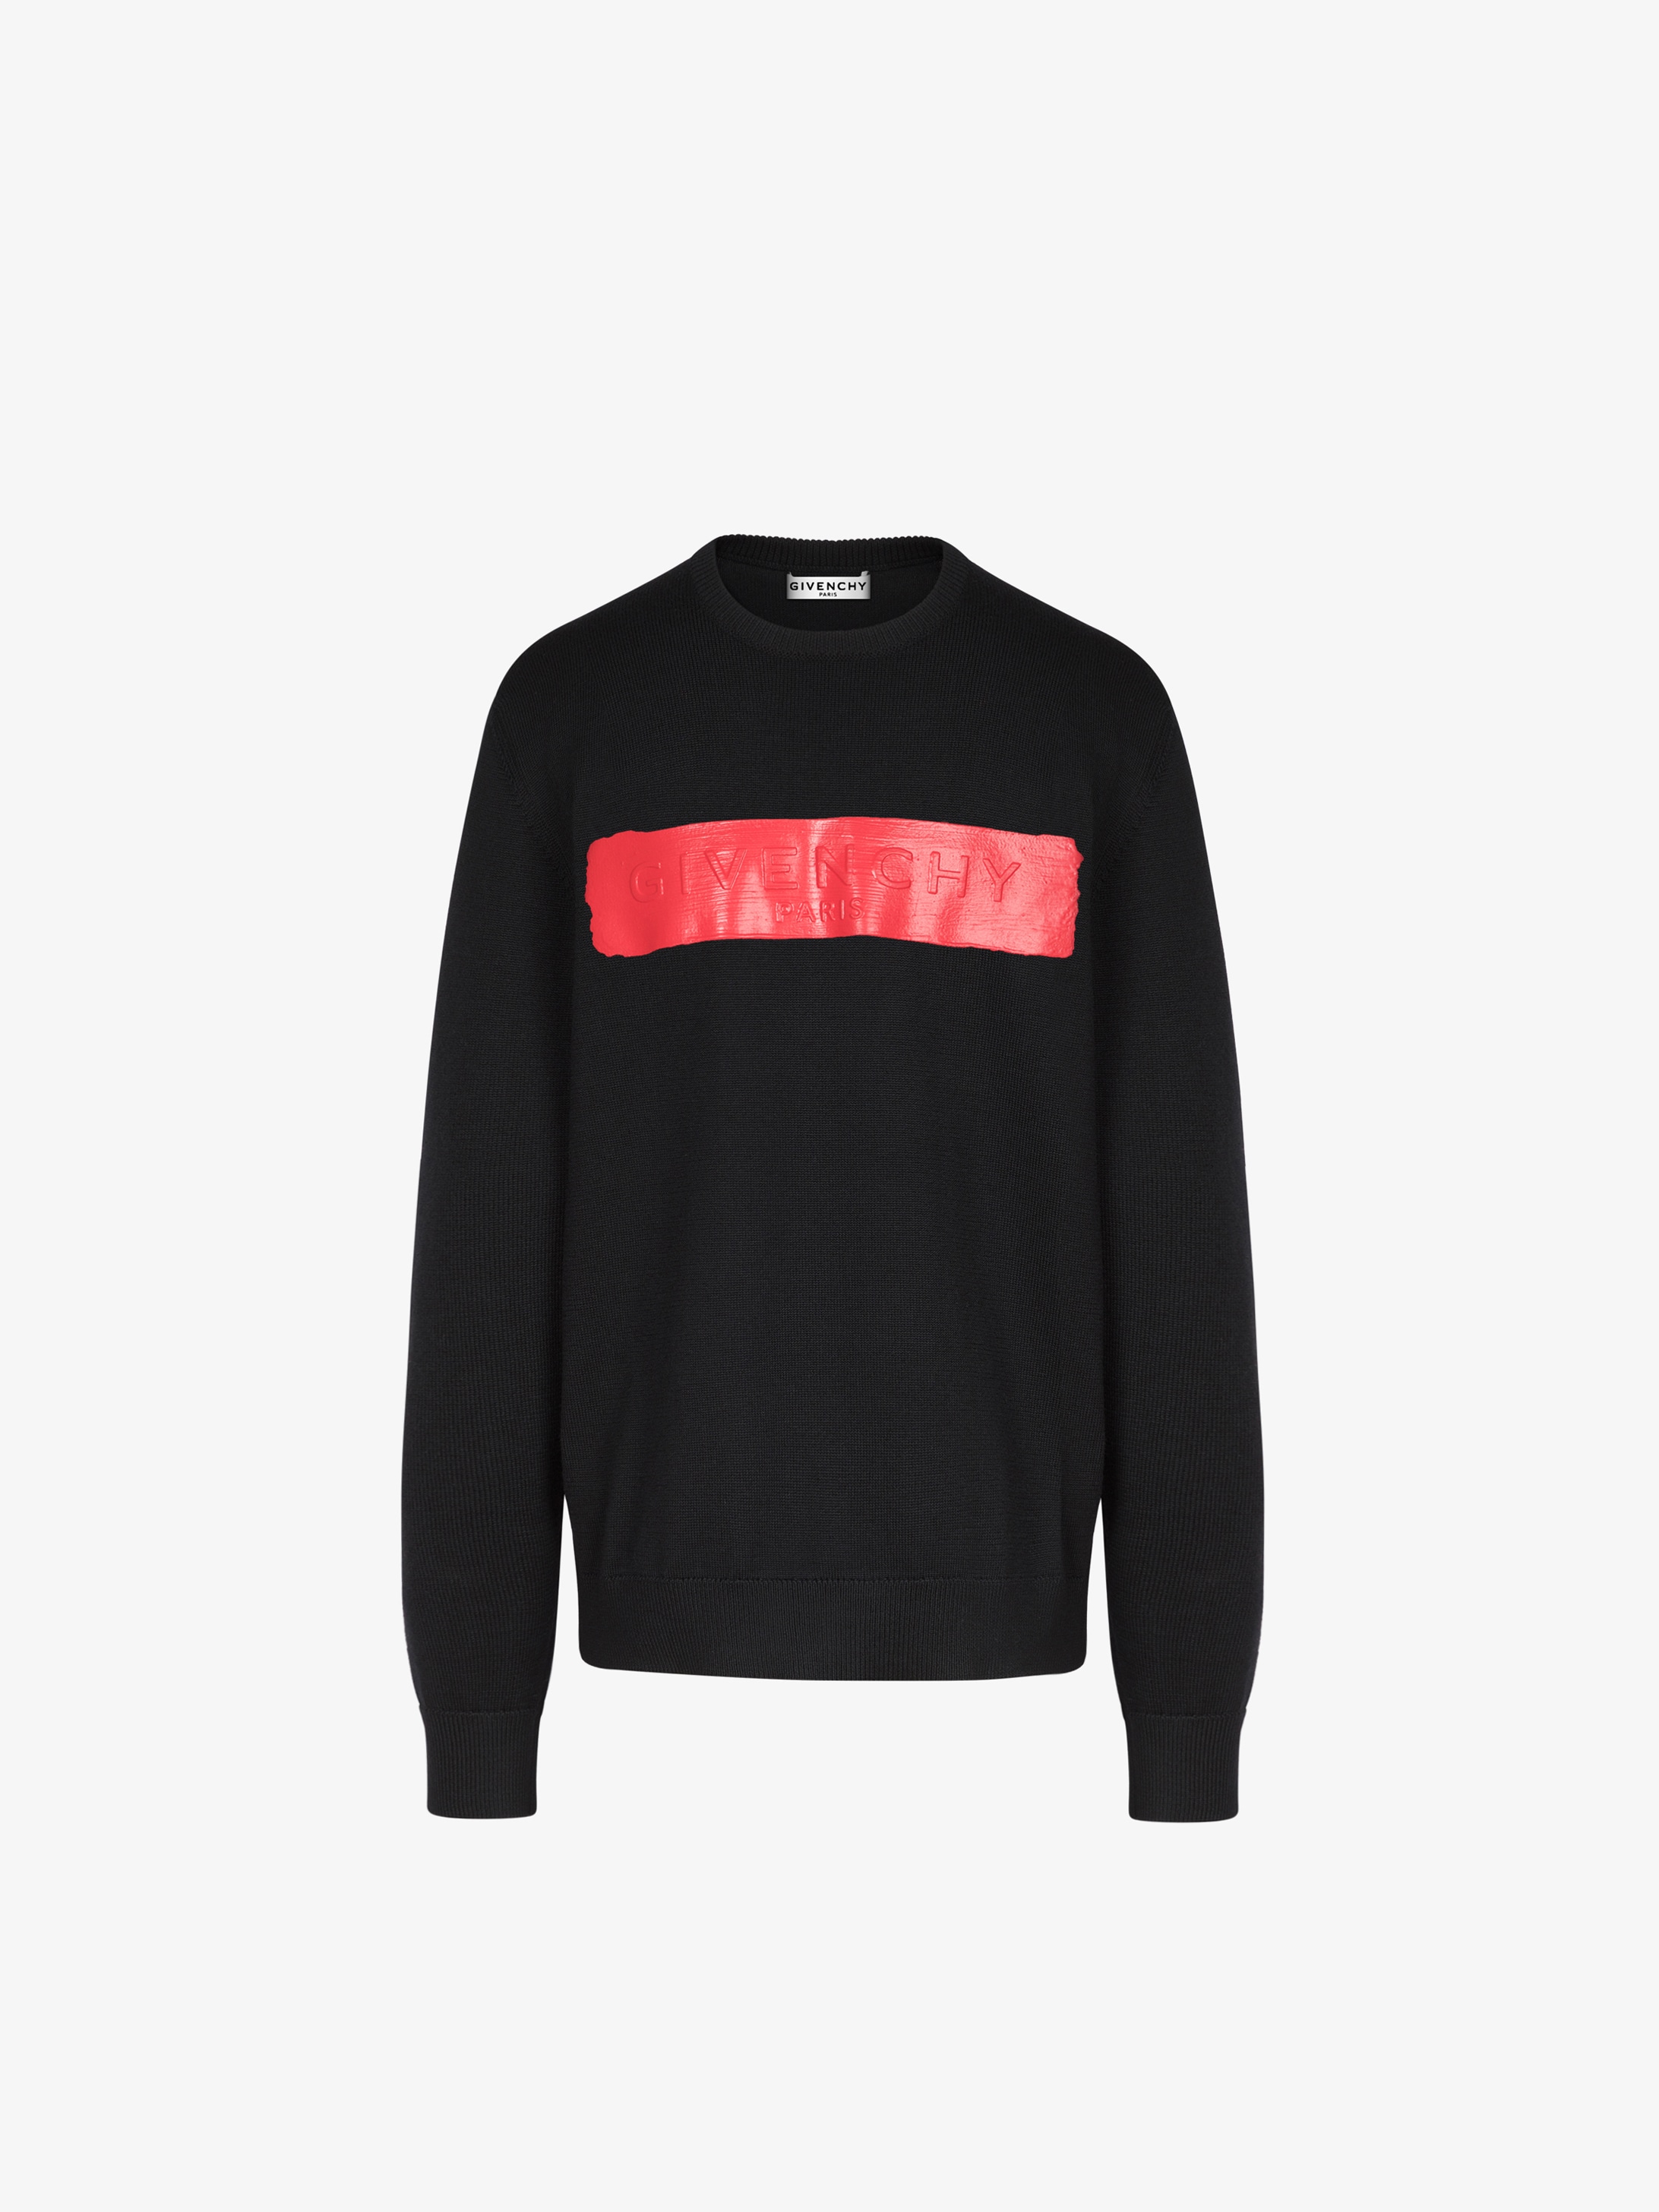 black white and red givenchy sweater